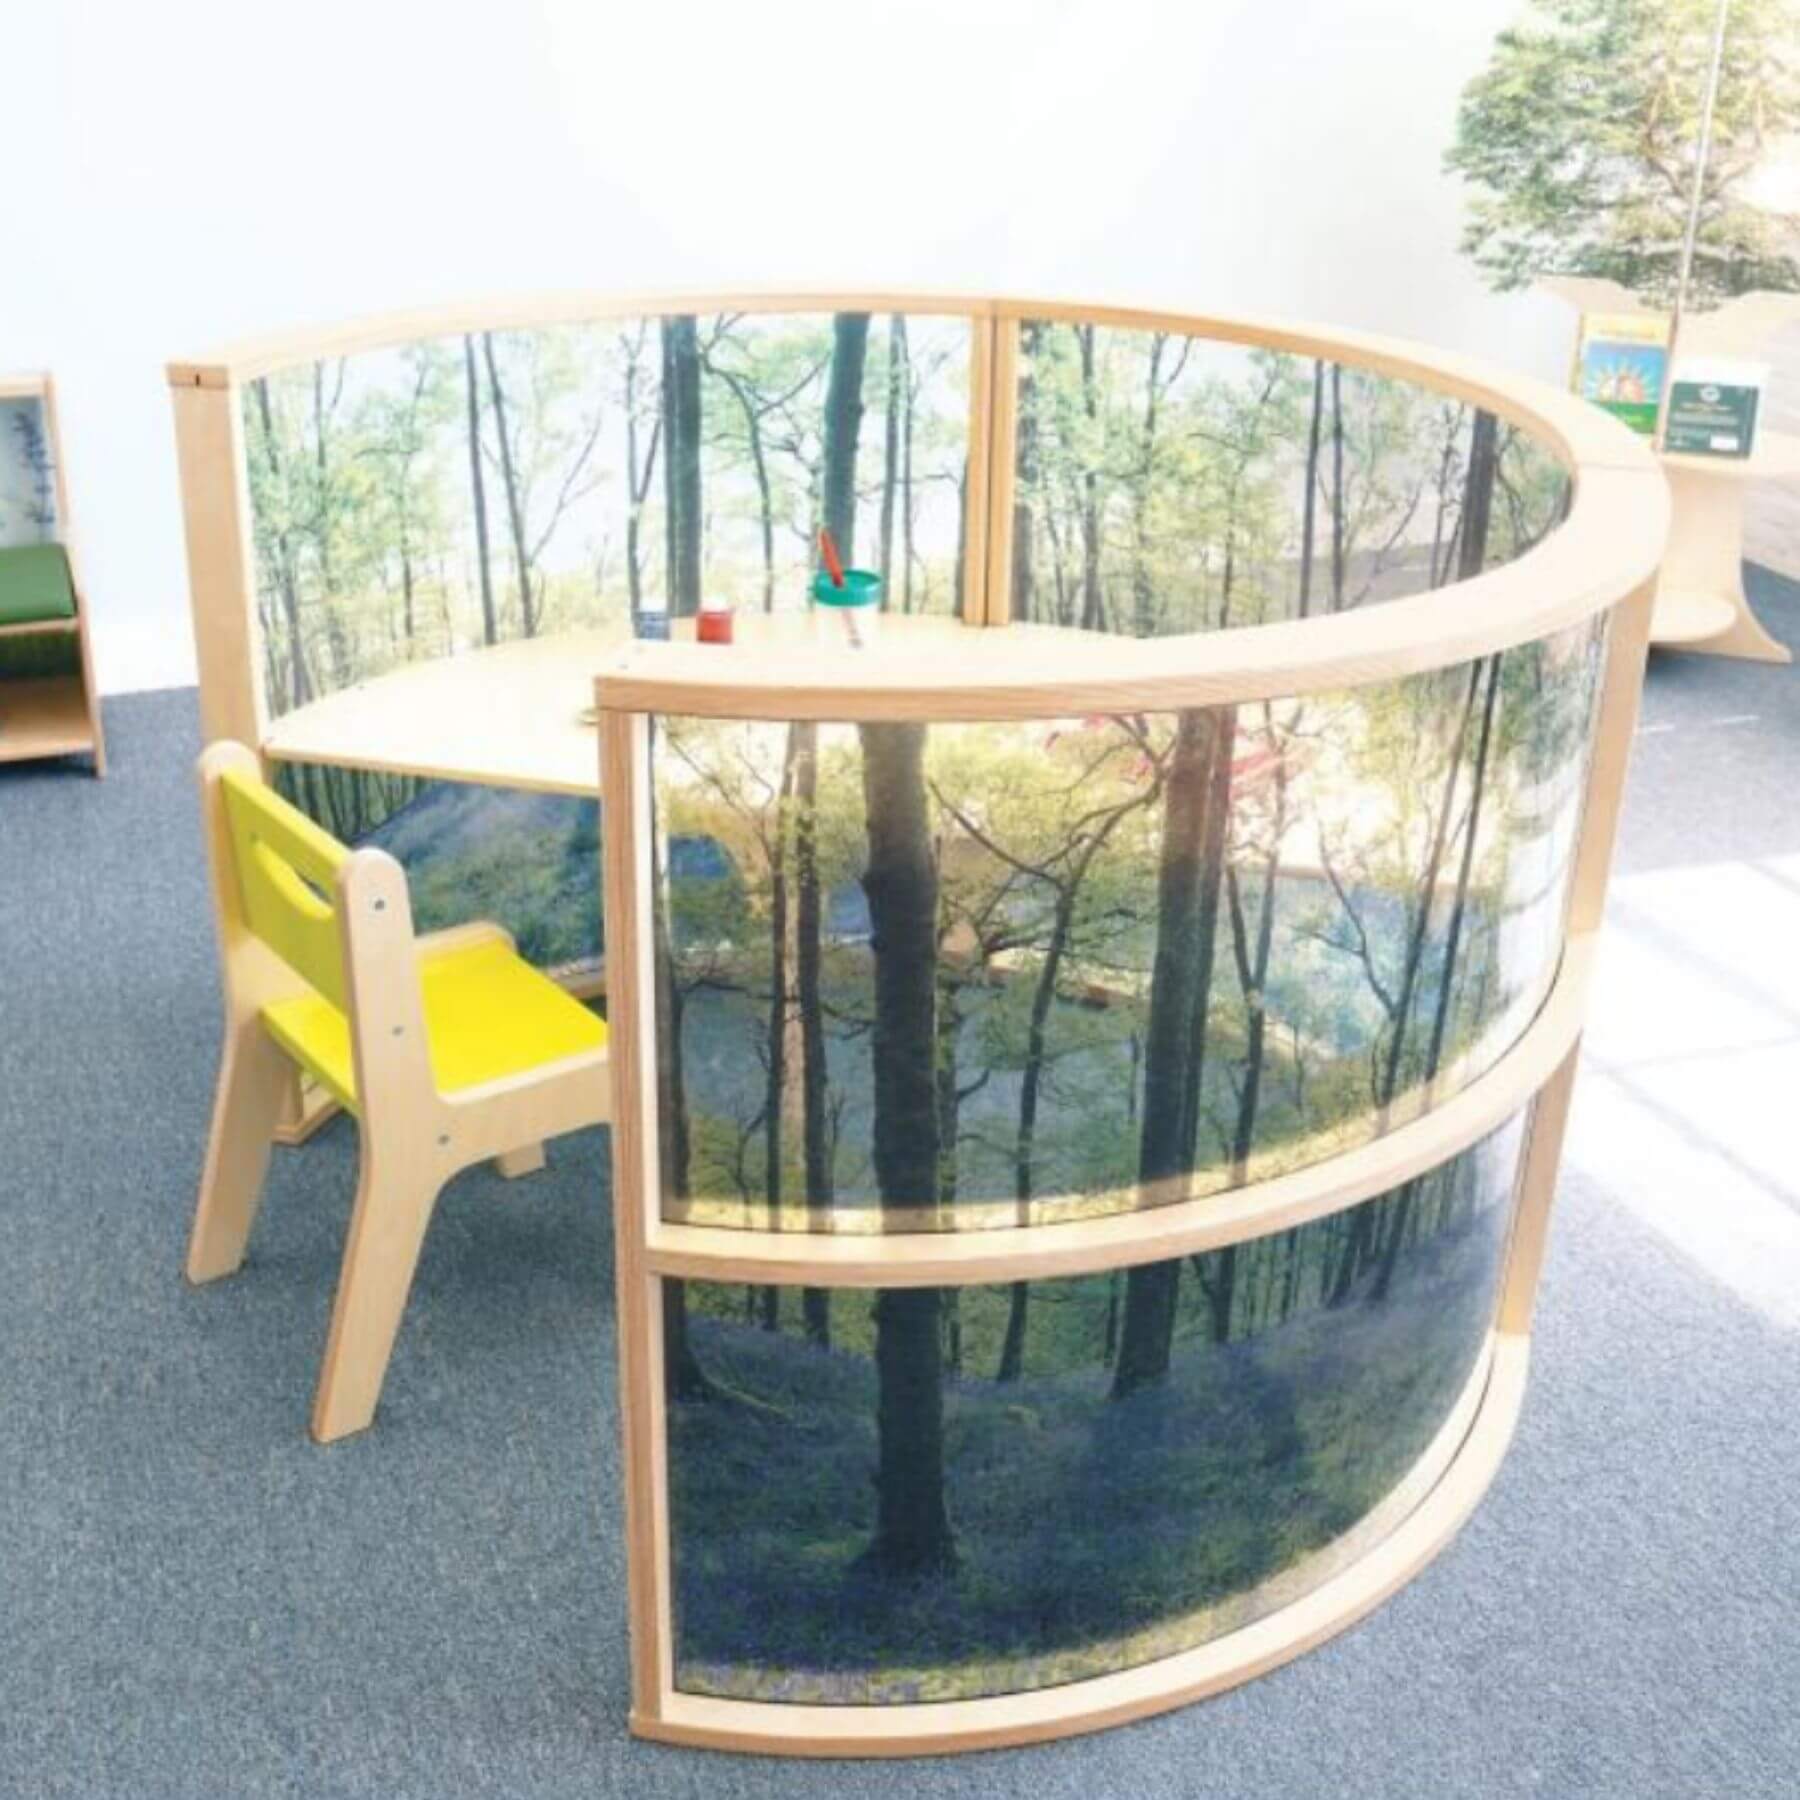 2 Whitney Brothers Nature View Serenity Pod